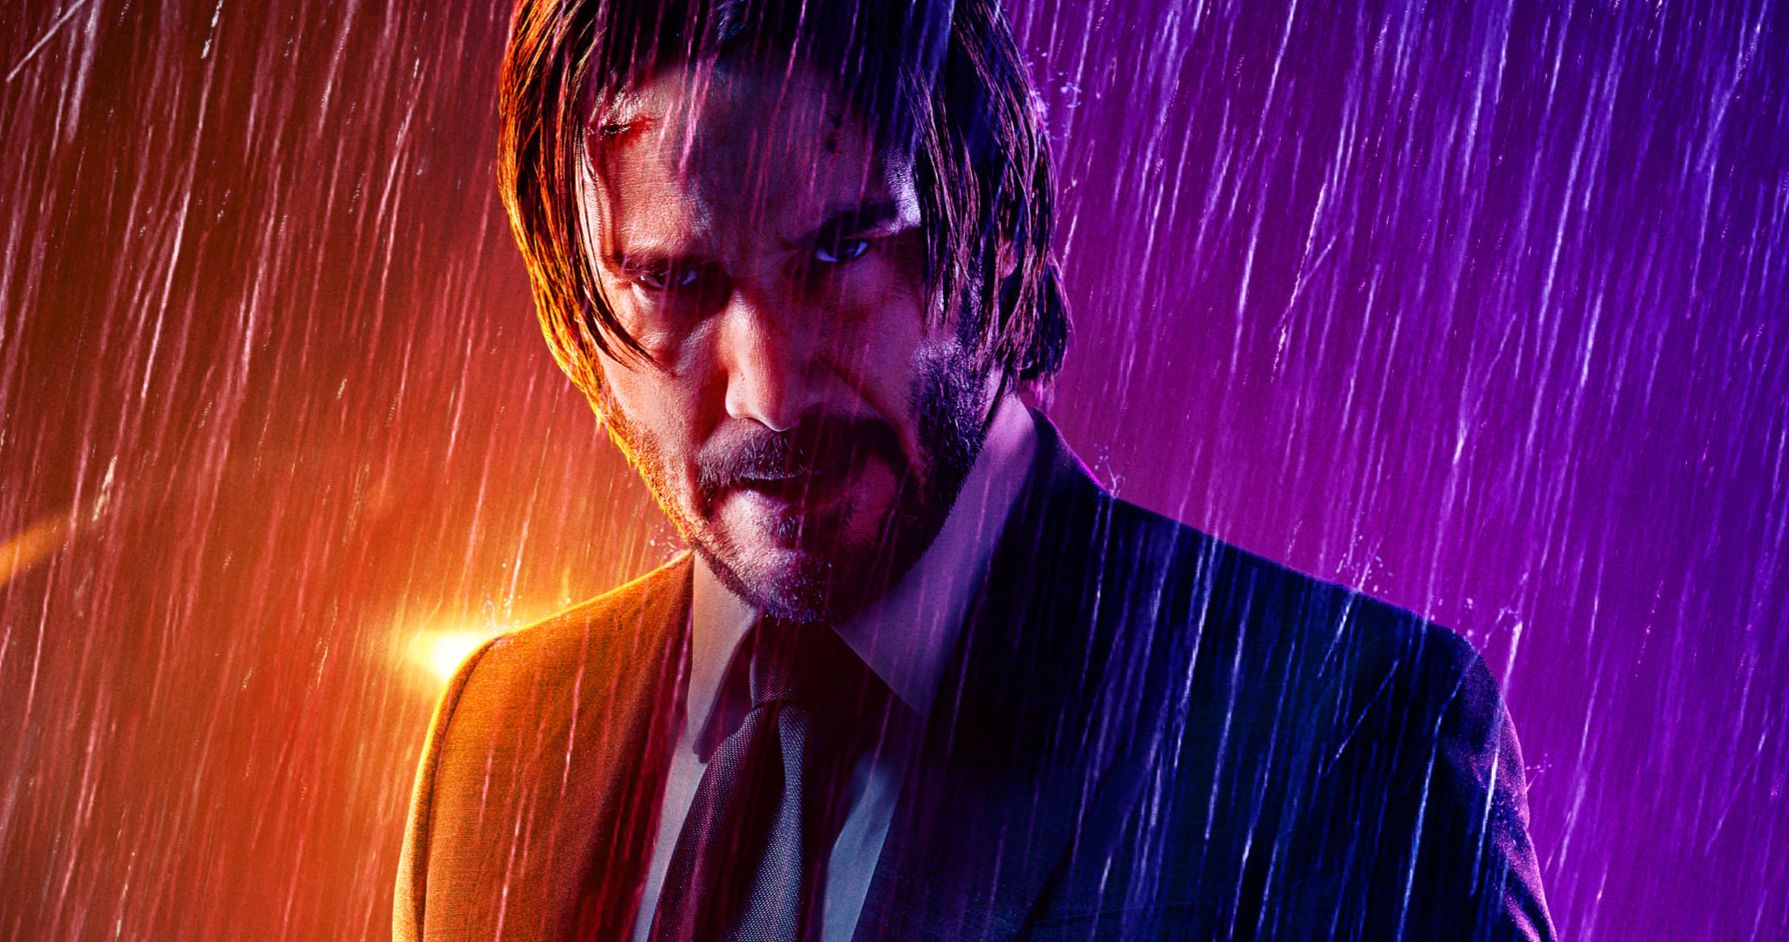 Is the John Wick Franchise Really About the 5 Stages of Grief?